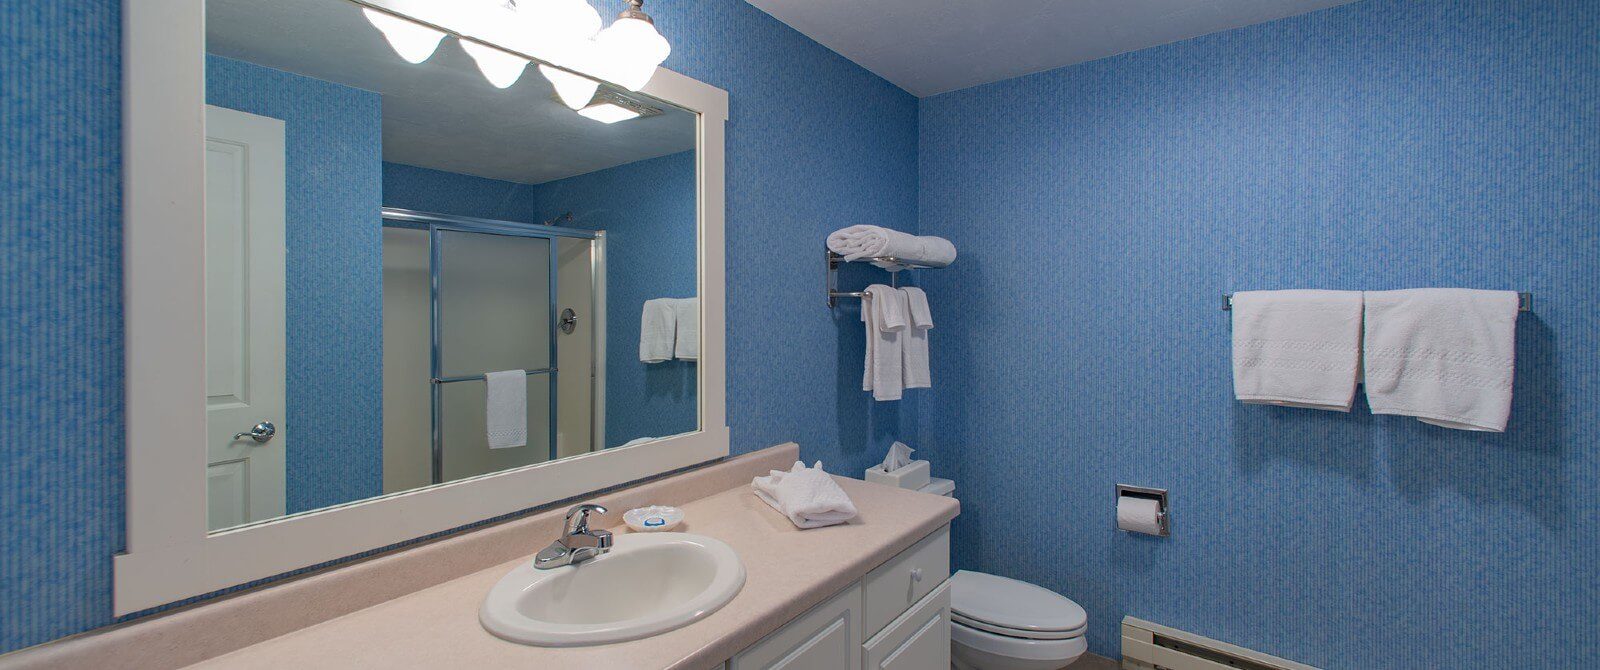 Bathroom with blue wallpaper, single sink vanity, toilet and large white framed mirror